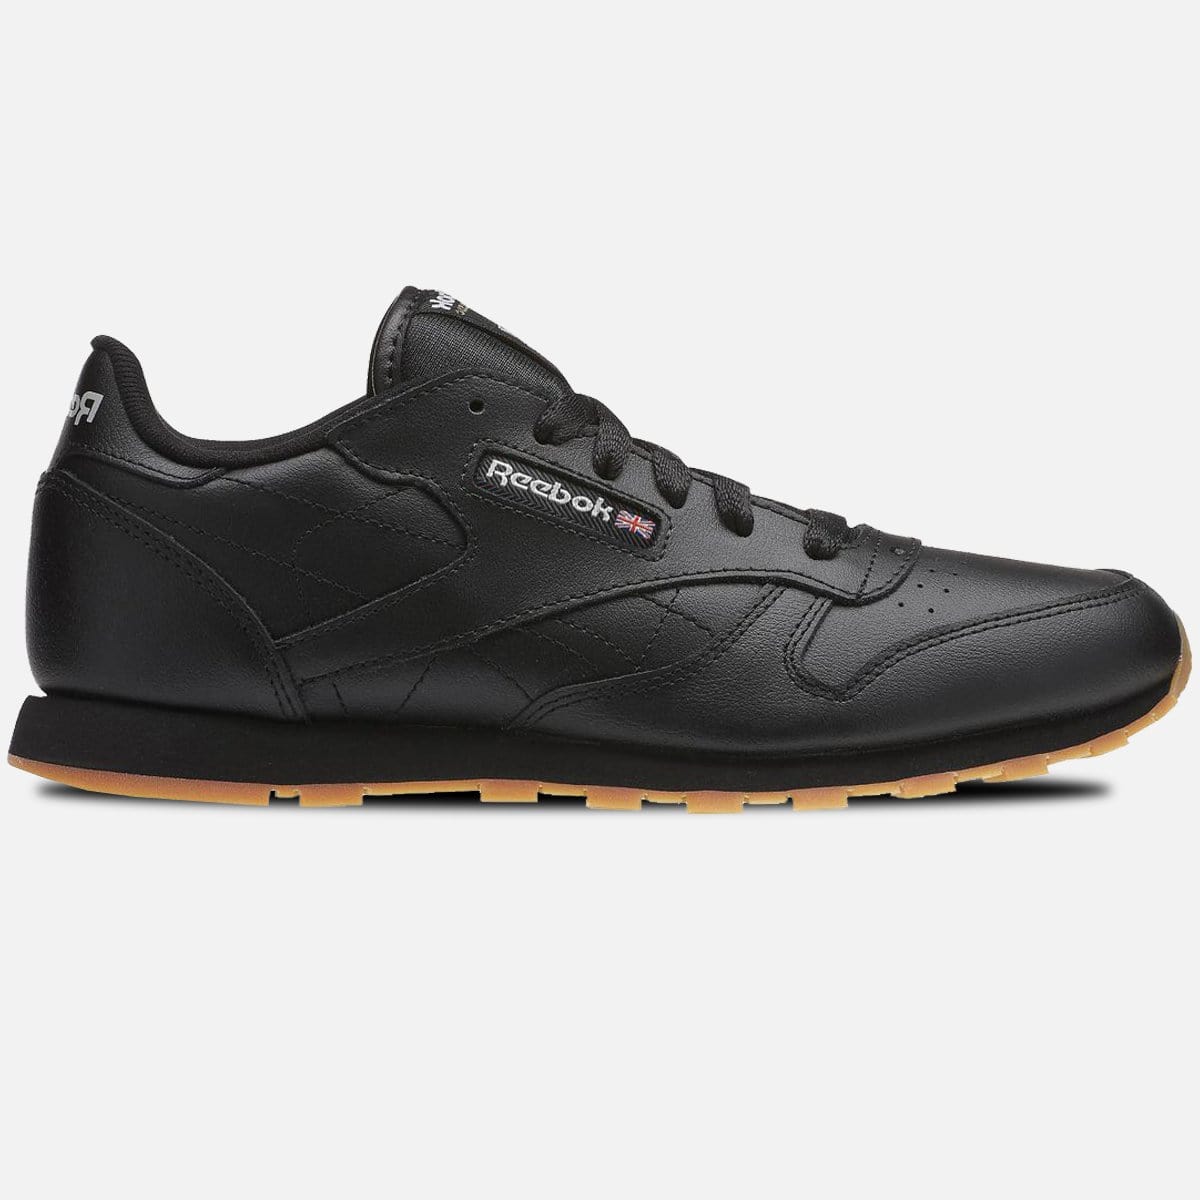 RUVilla.com is where to buy the Reebok Classic Leather (Black/Gum)!